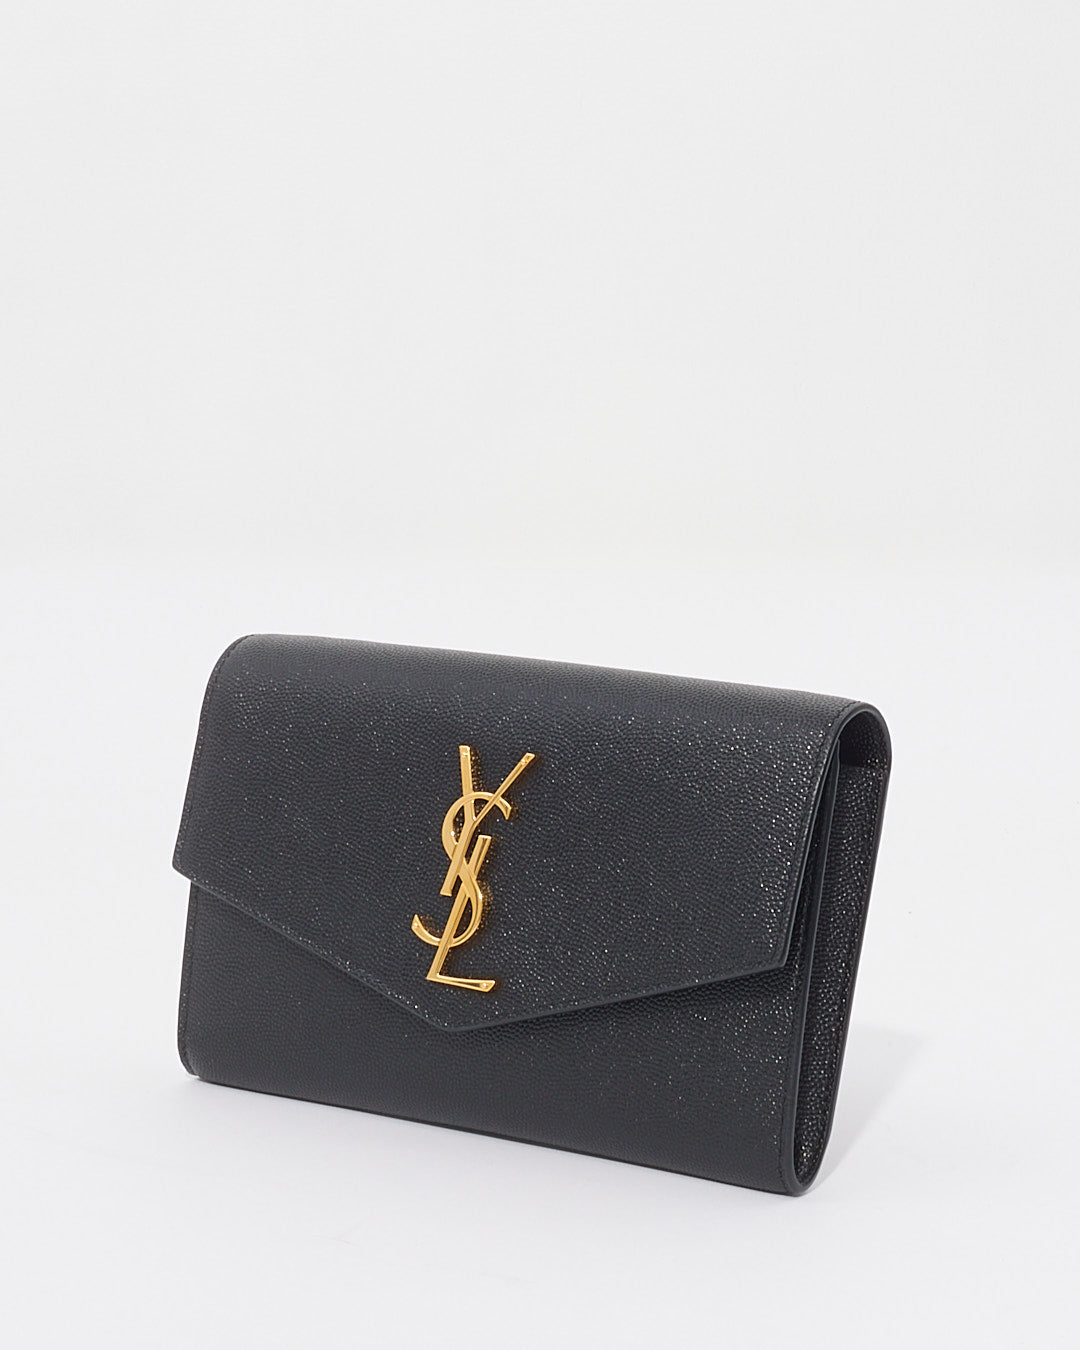 Saint Laurent Black Leather Uptown Chain Wallet with Removable Crossbody Strap